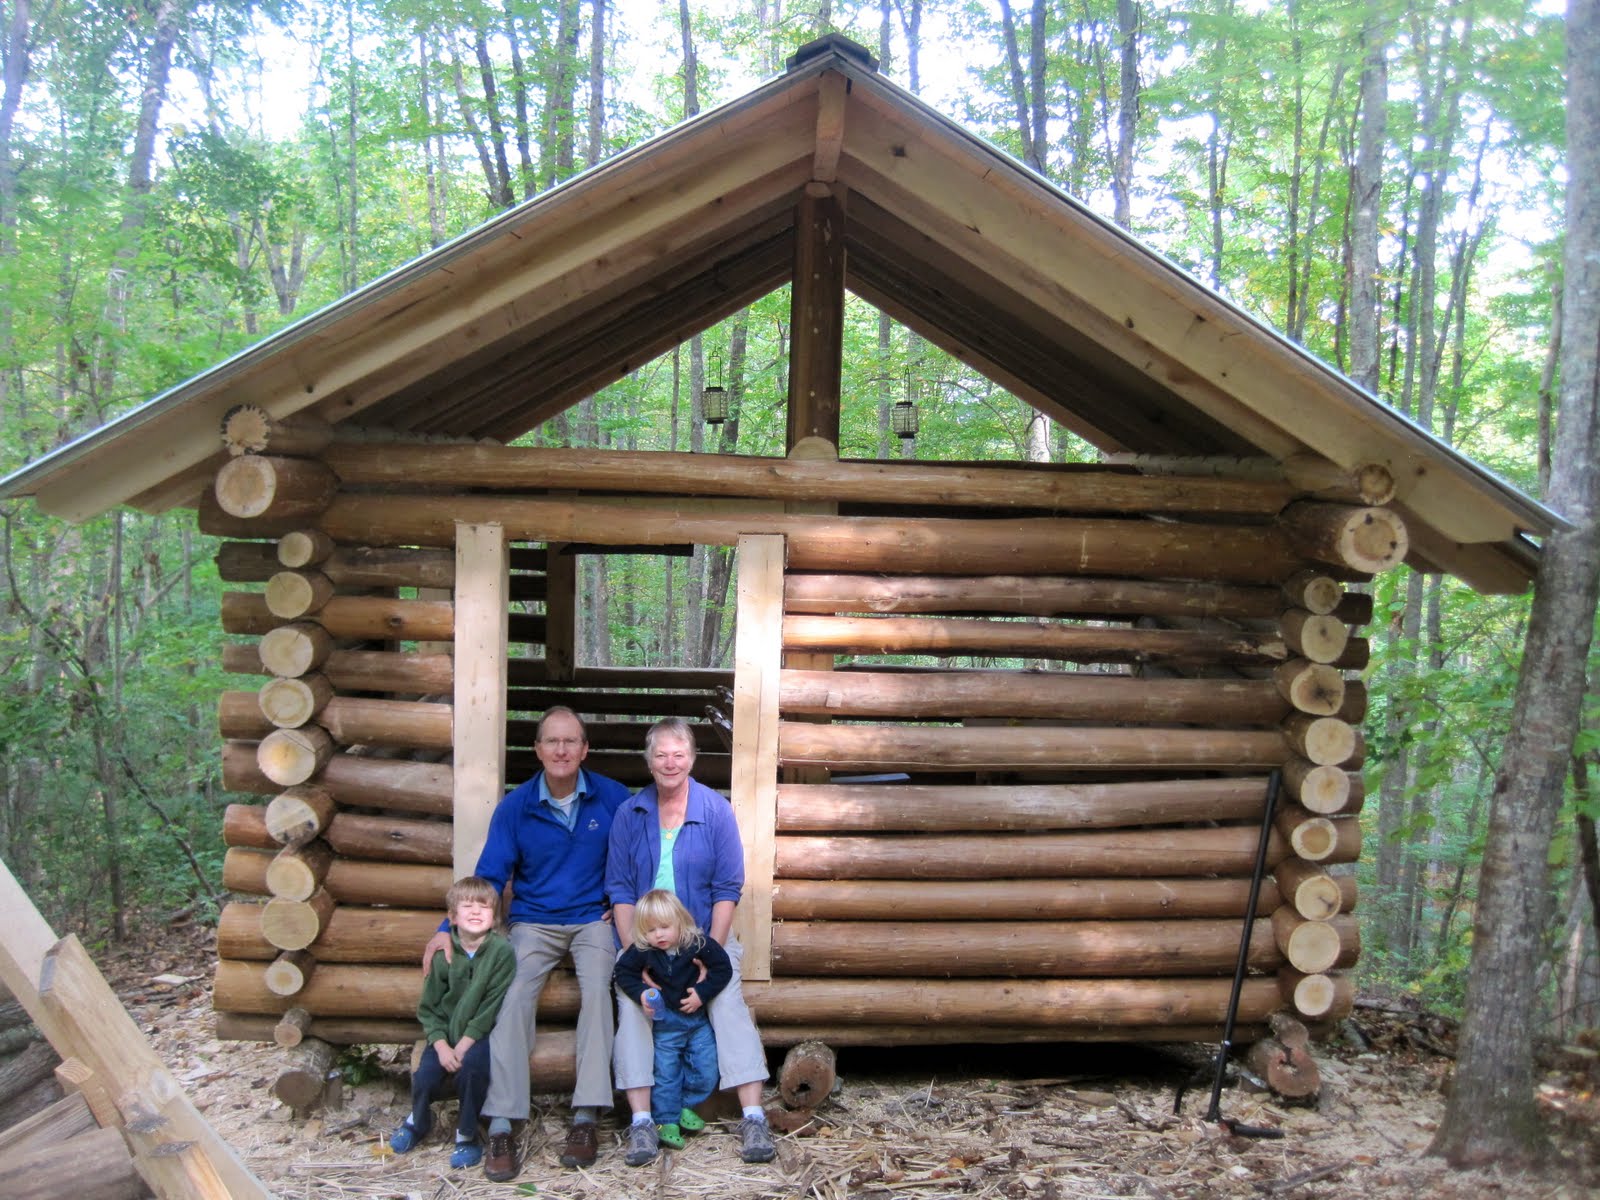 COLD HOLLER: a Postmodern (B)log Cabin in the Land of the Noonday Sun ...